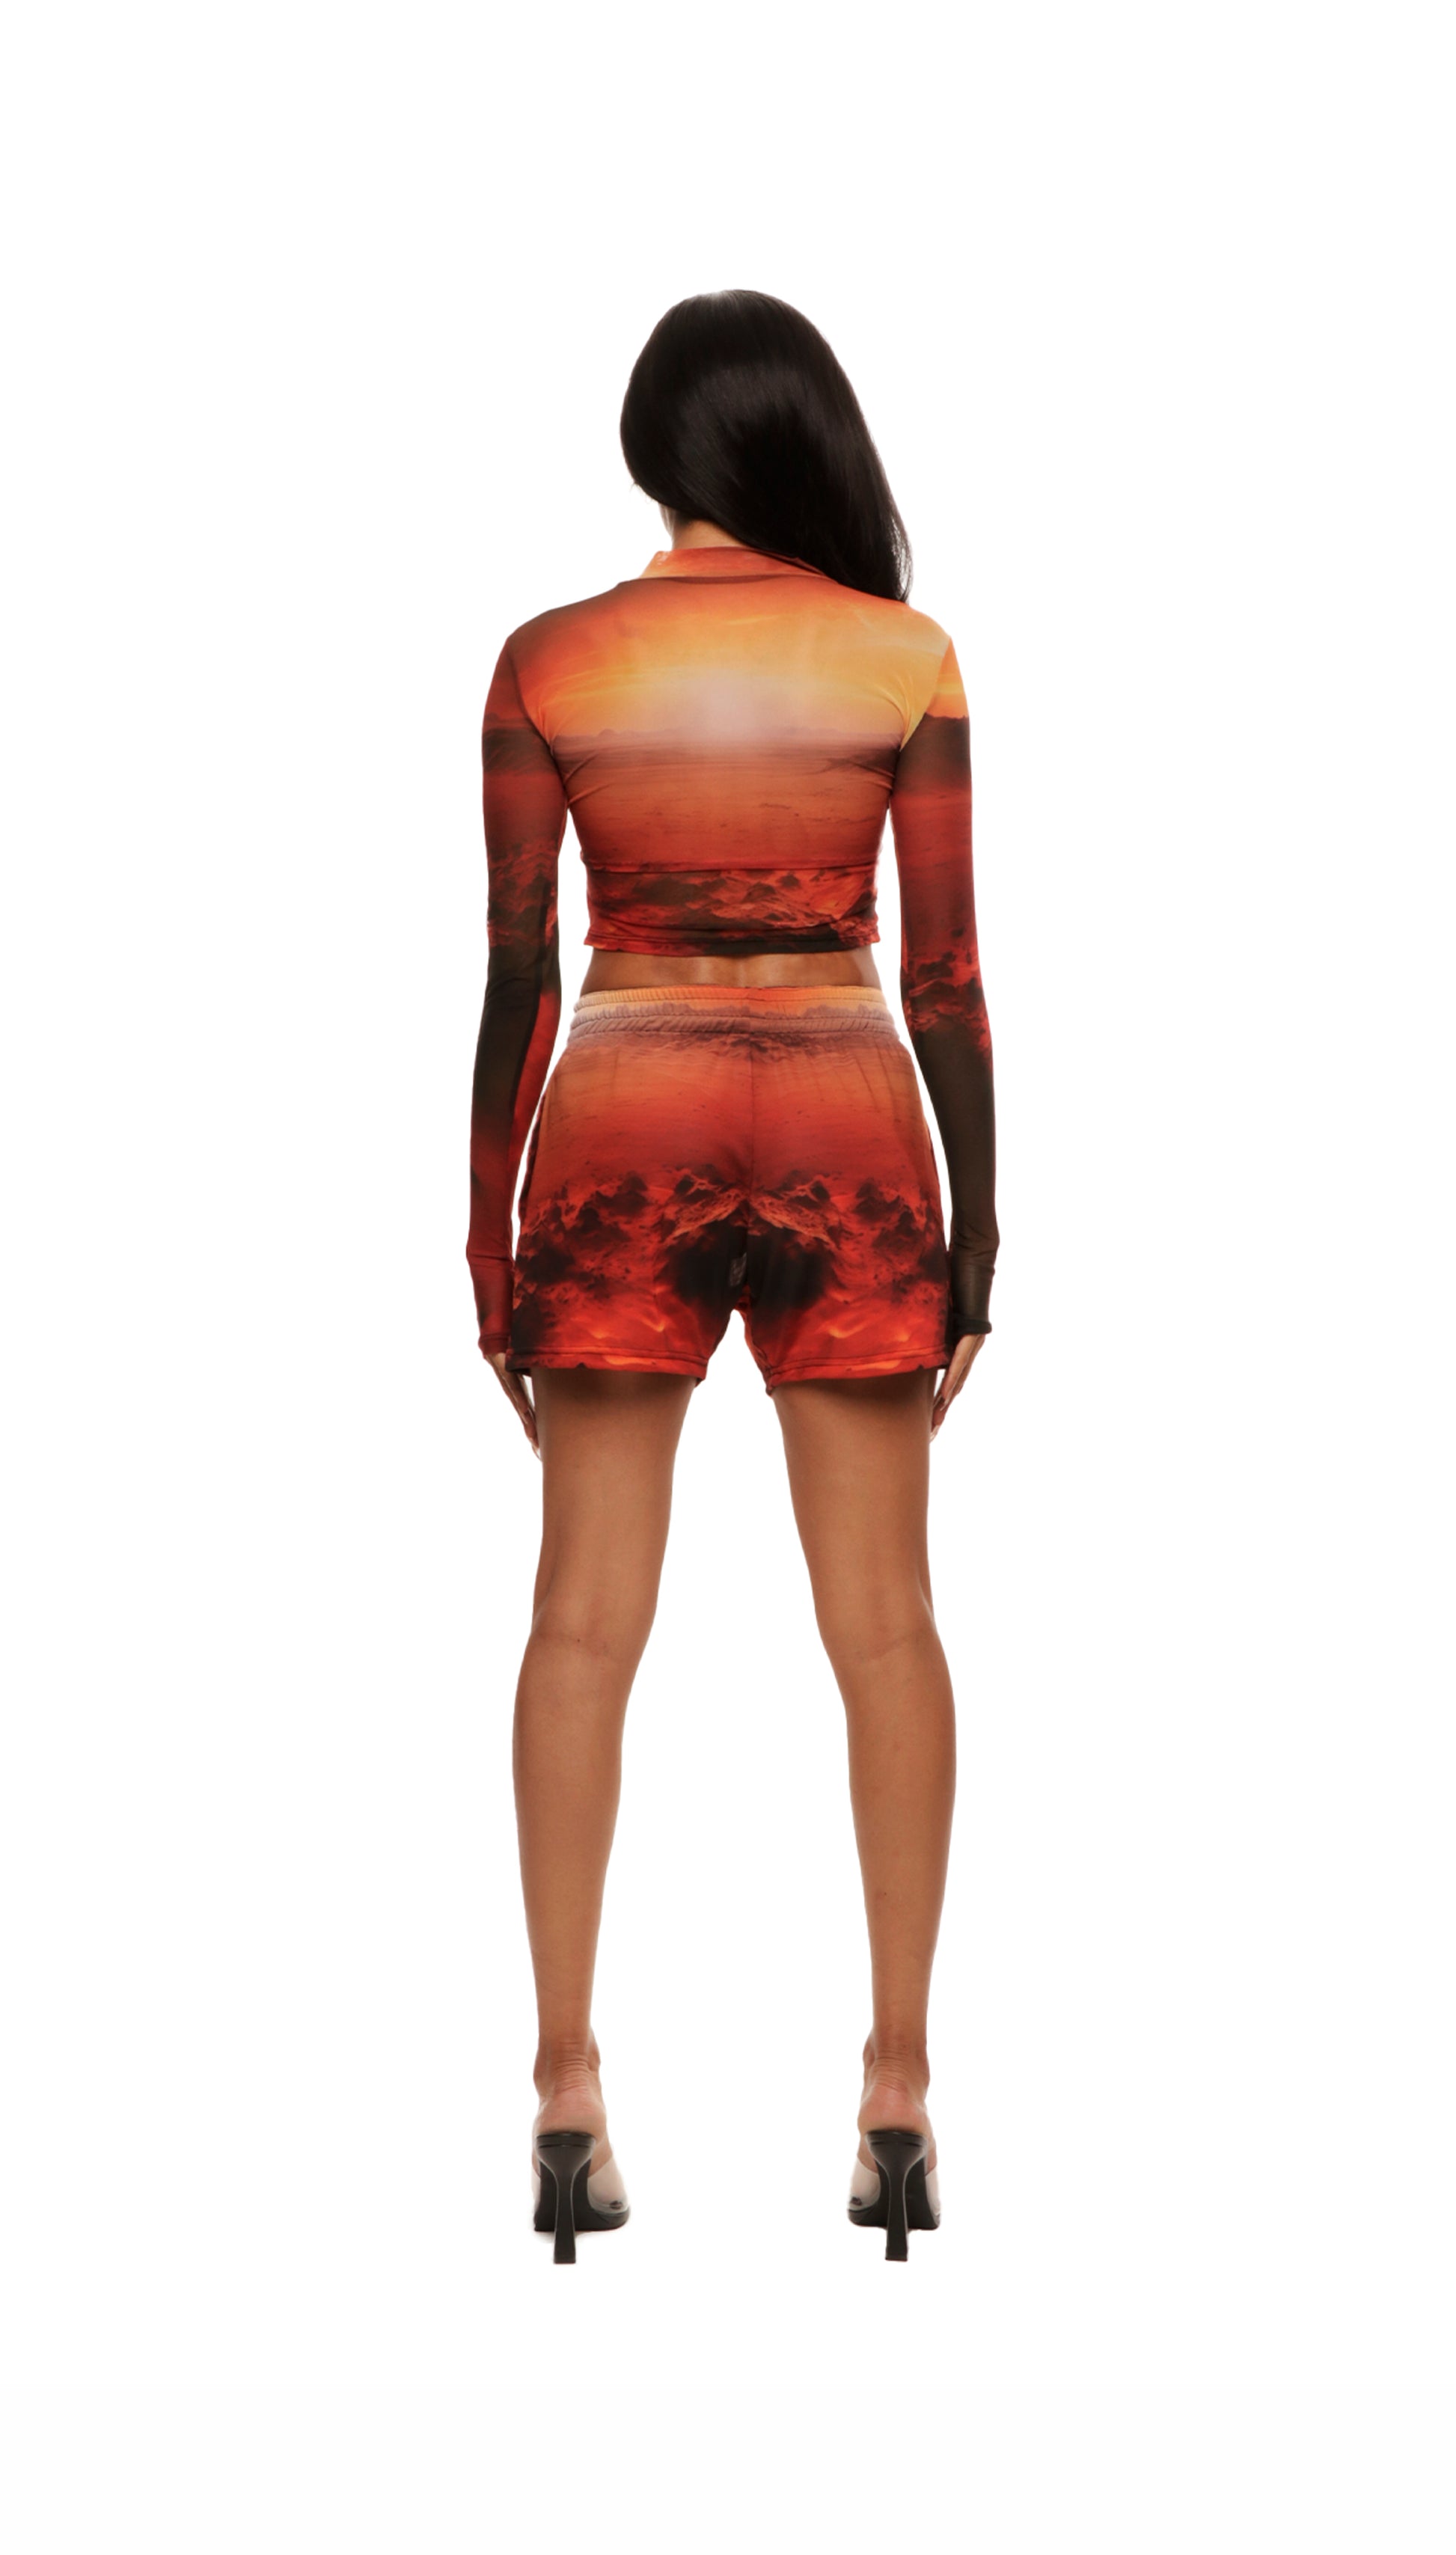 Back view of woman who looks like Beyoncé or Aaliyah wears cosmic Mars sunset printed mesh short basketball shorts with QR logo detail